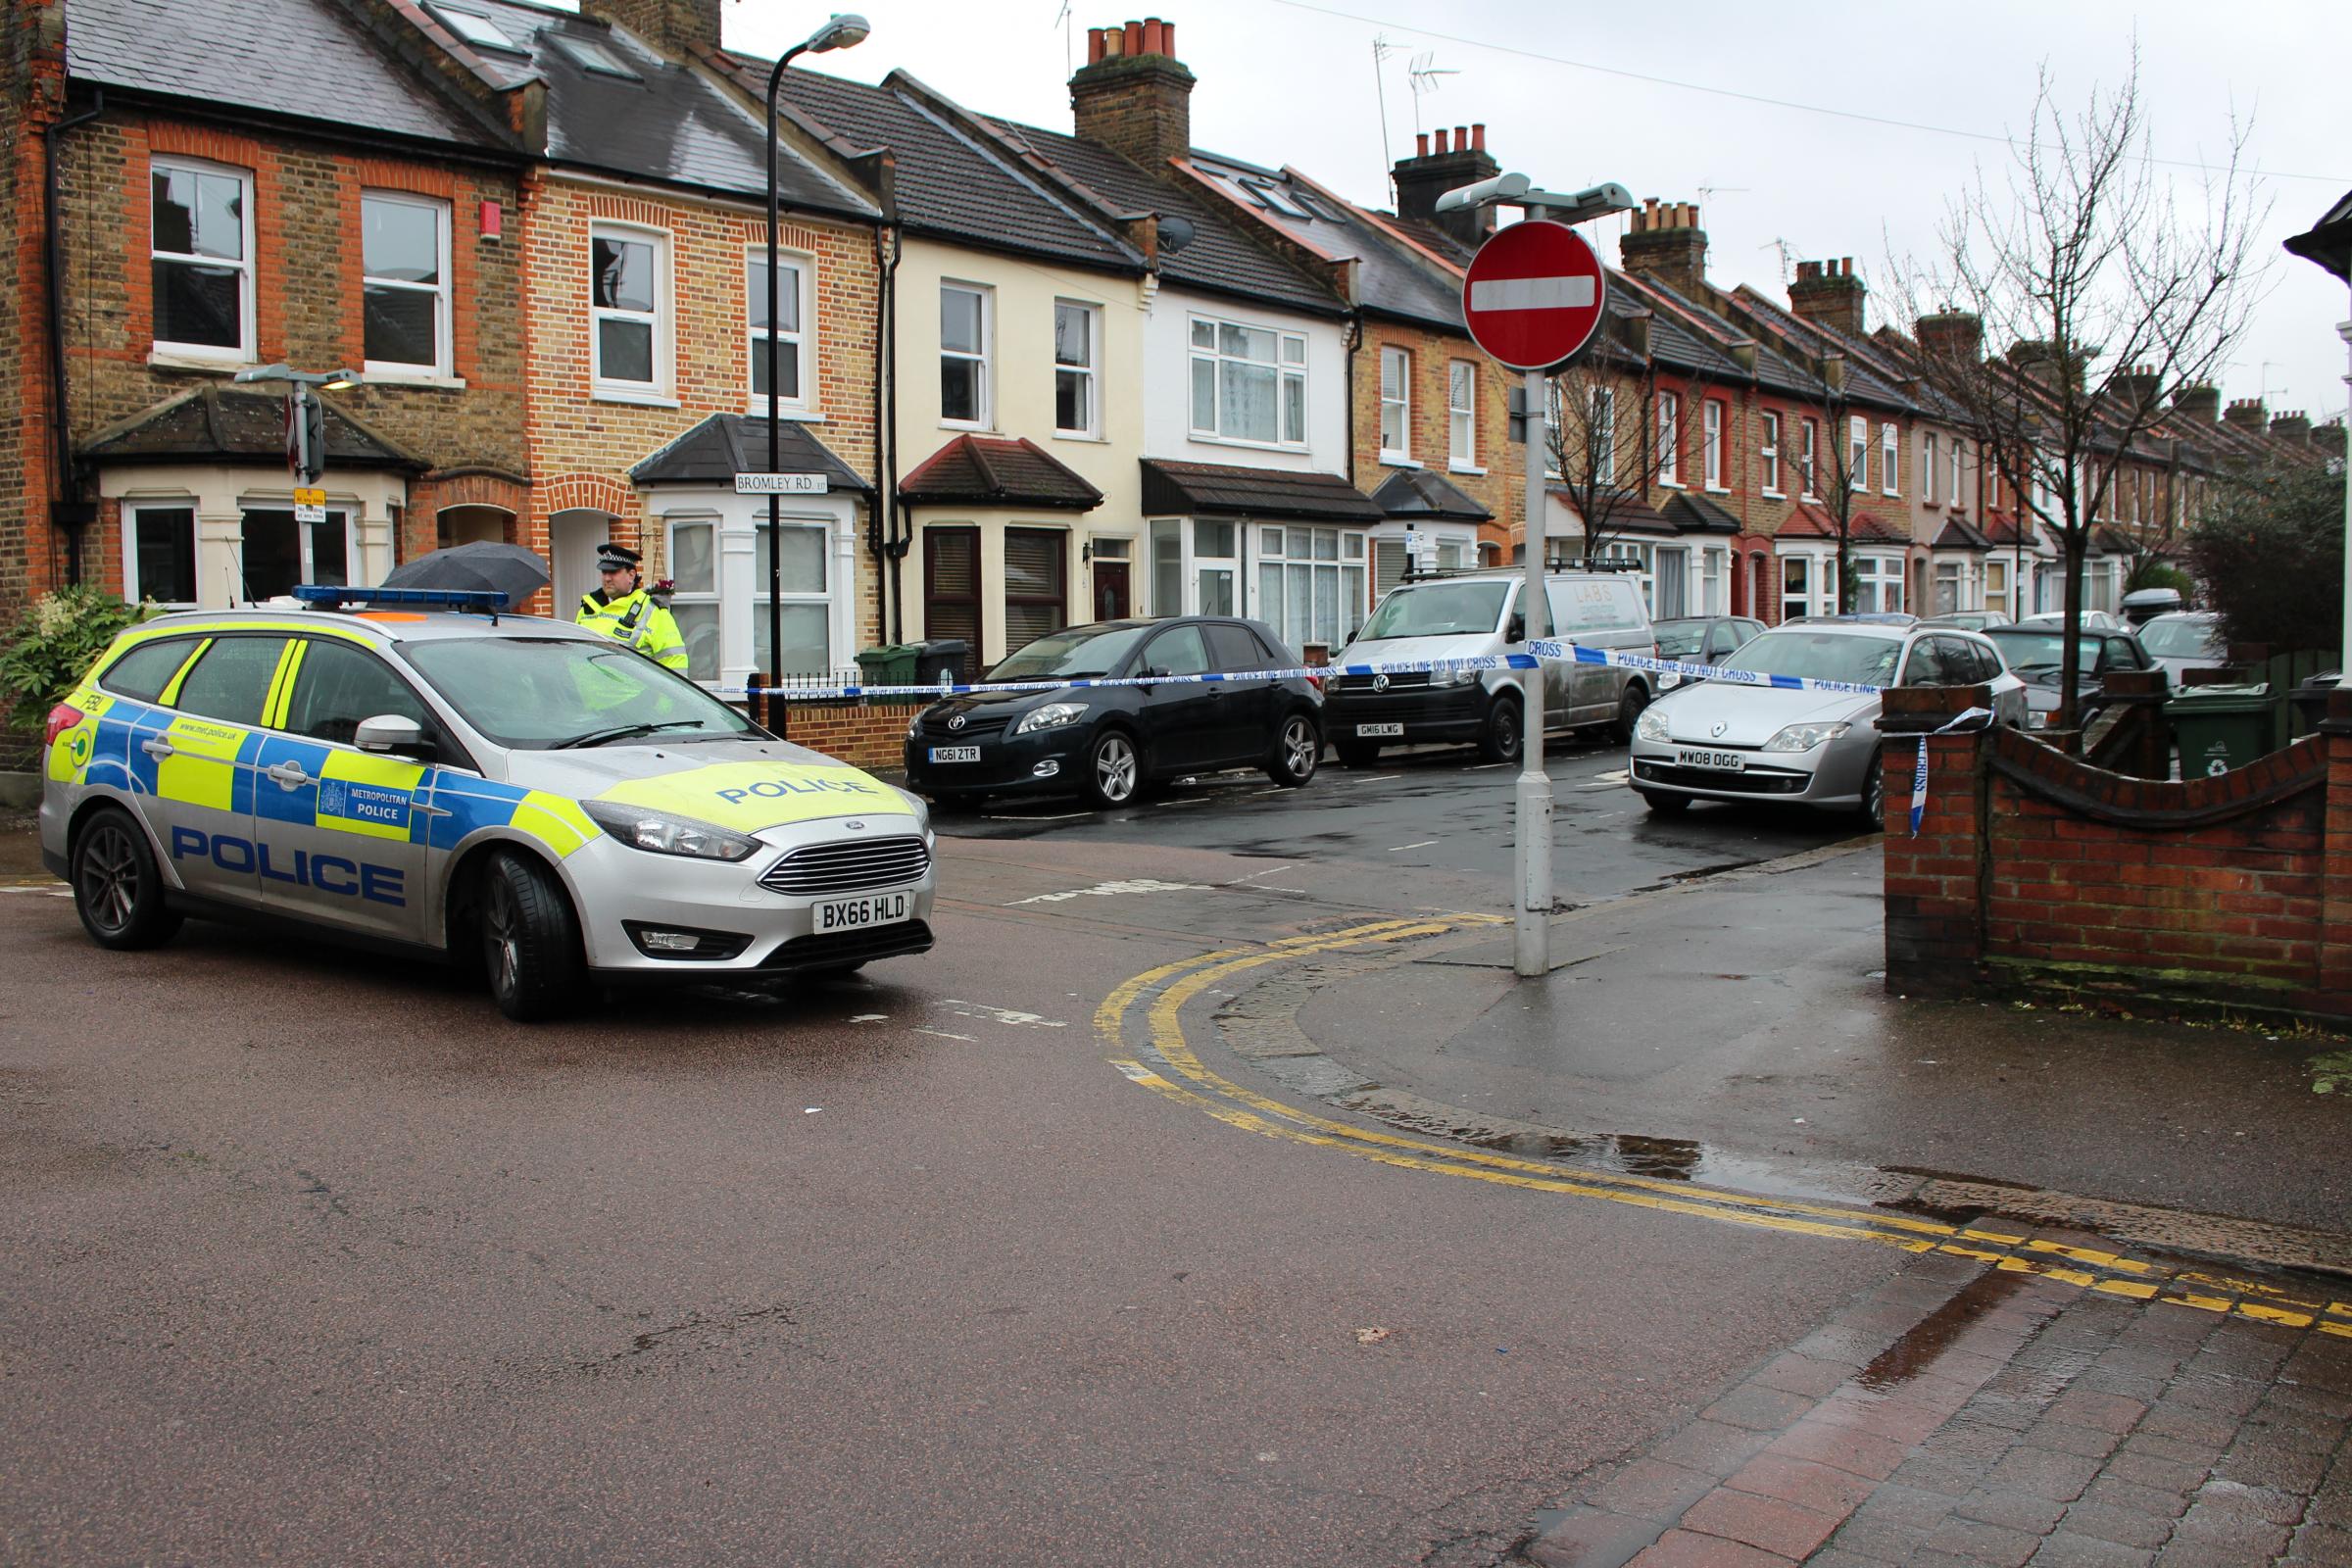 Police officers at the crime scene in Bromley Road the morning after the vicious attack. Photo: Lewis Berrill